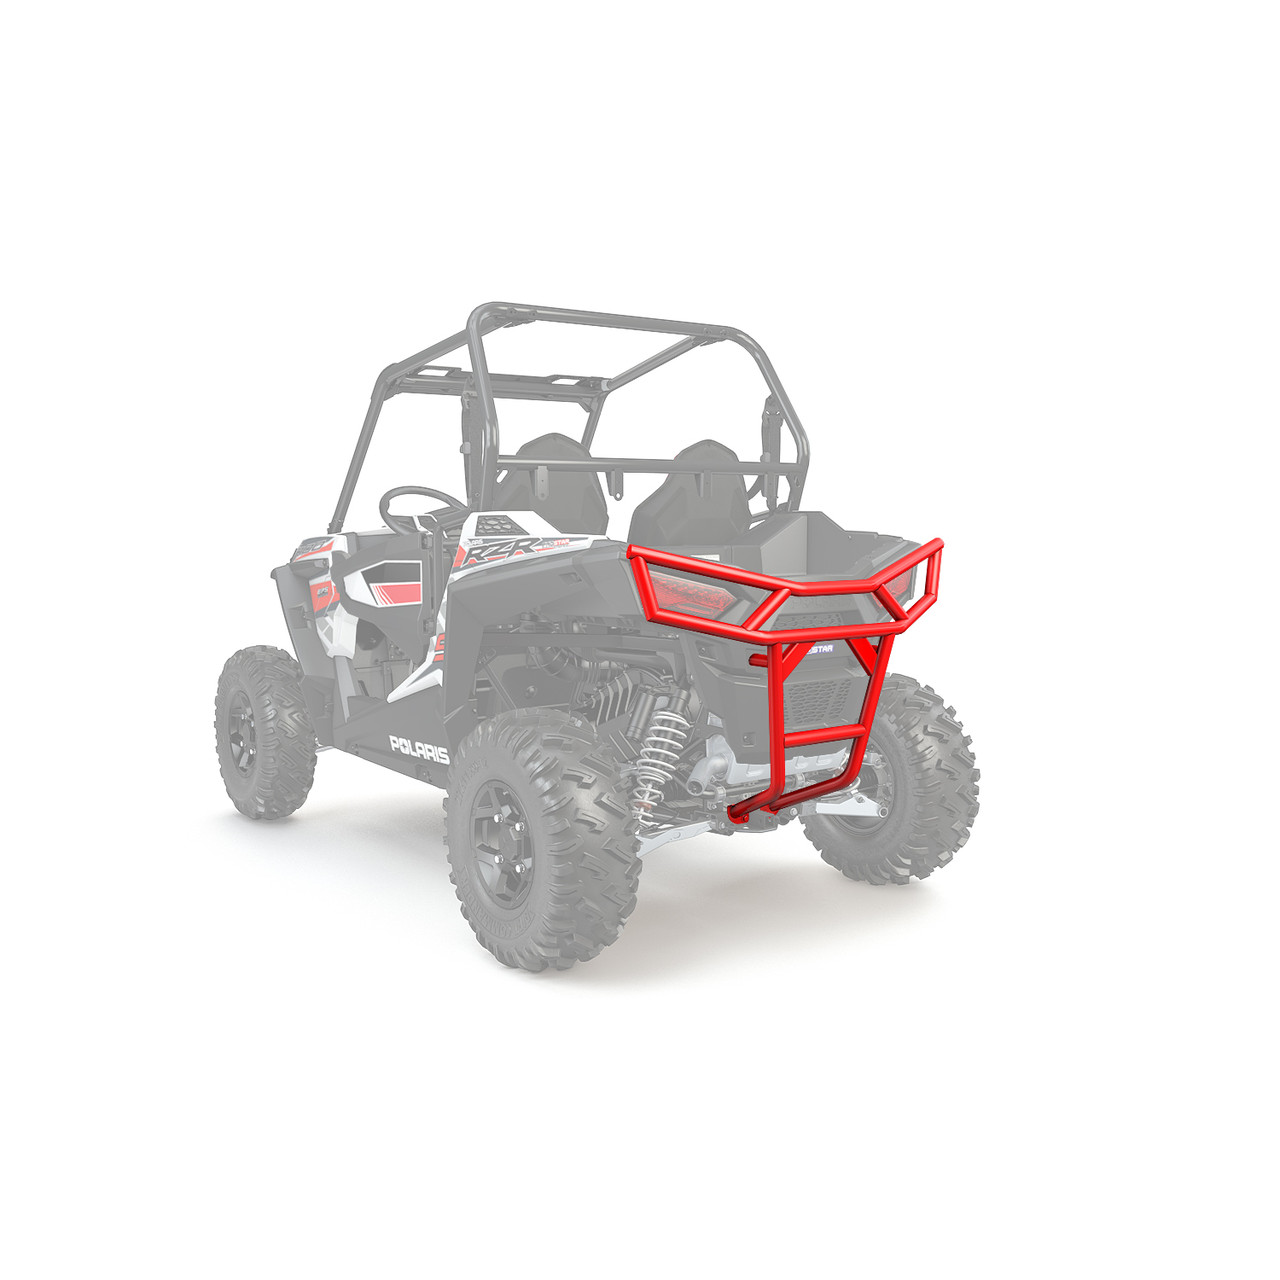 Polaris New OEM Rear Deluxe Bumper Indy Red RZR, 2881590-293